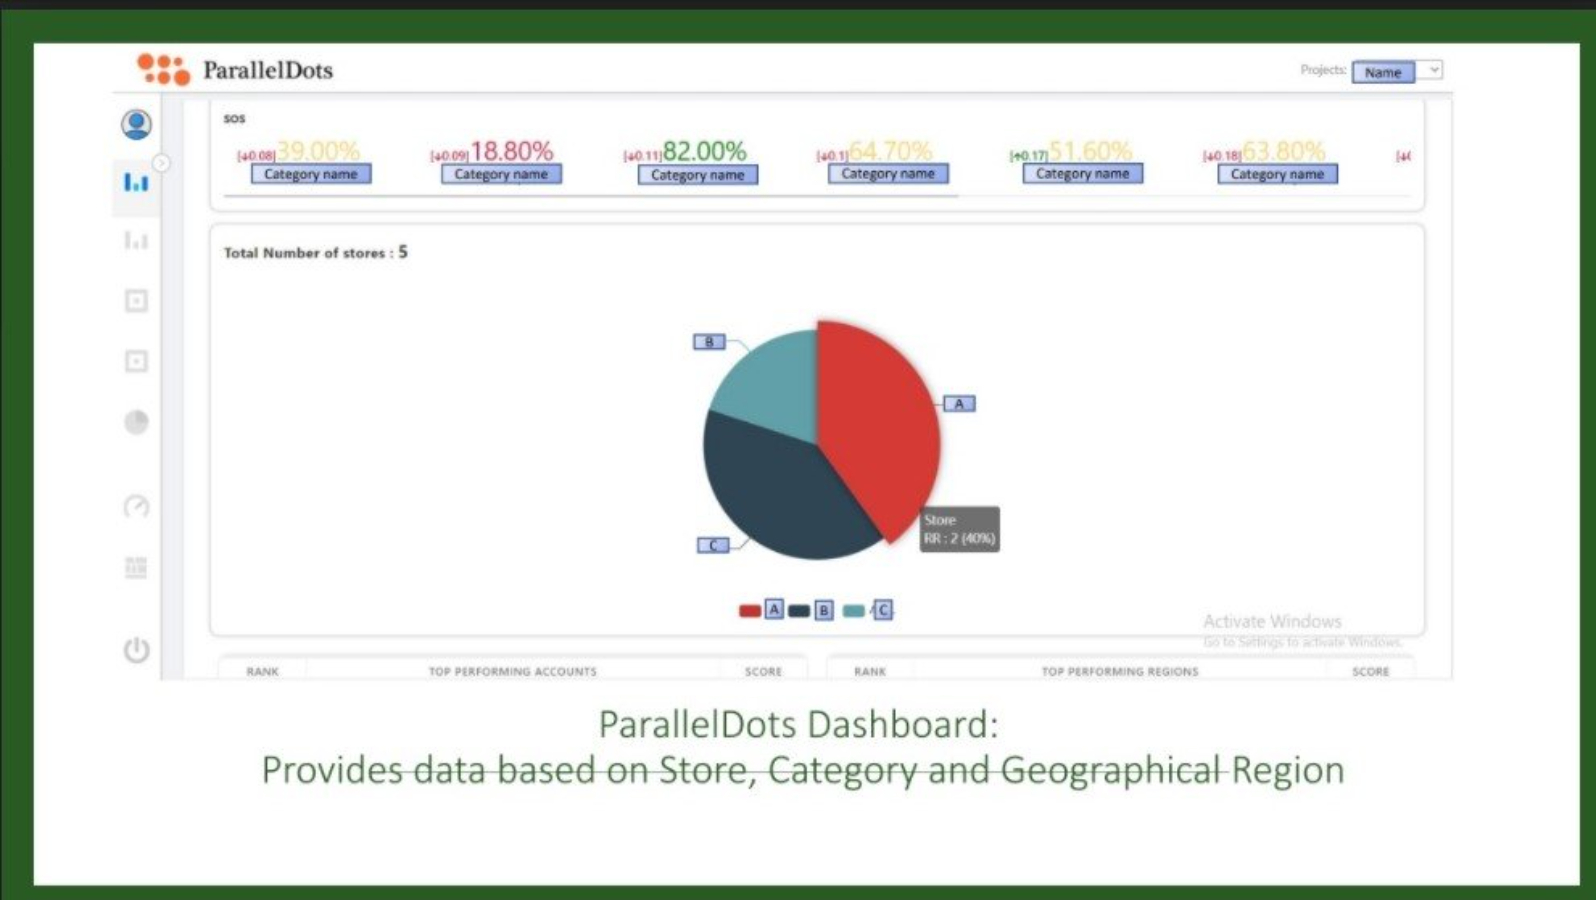 A view of ParallelDots ShelfWatch Dashboard